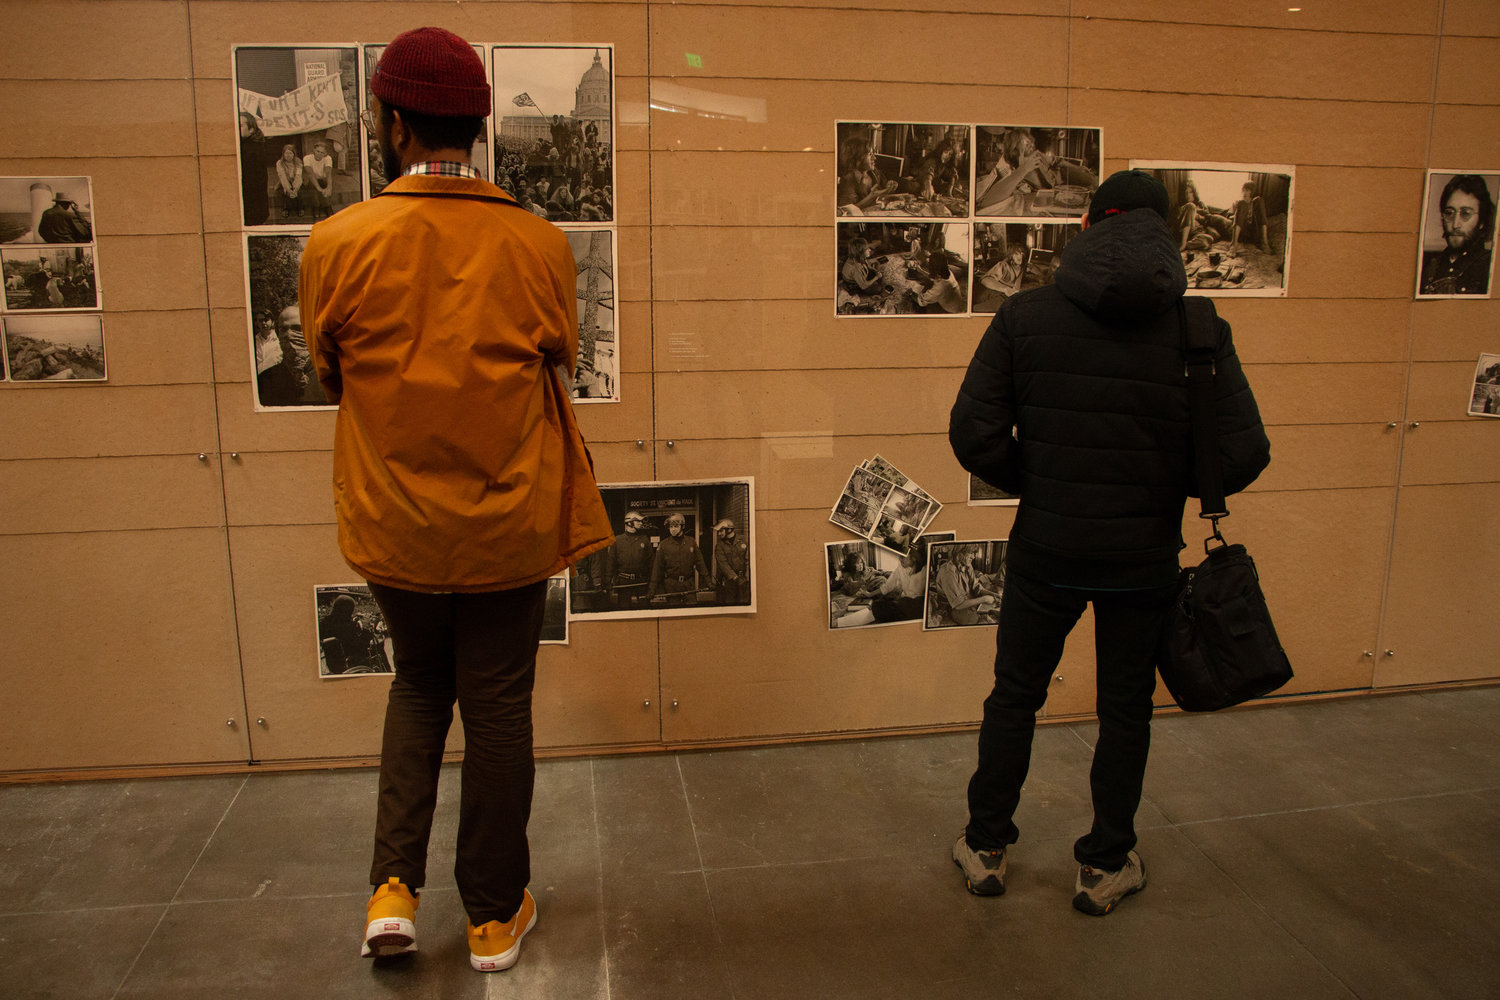 Museum attendees tour the extensive exhibit of photographer Annie Leibovitz “The Early Years” at the Hauser &amp; Wirth Museum located in theArts District of downtown Los Angeles, Calif. The exhibit is open through April 14, 2019.Shayn Almeida / The Corsair